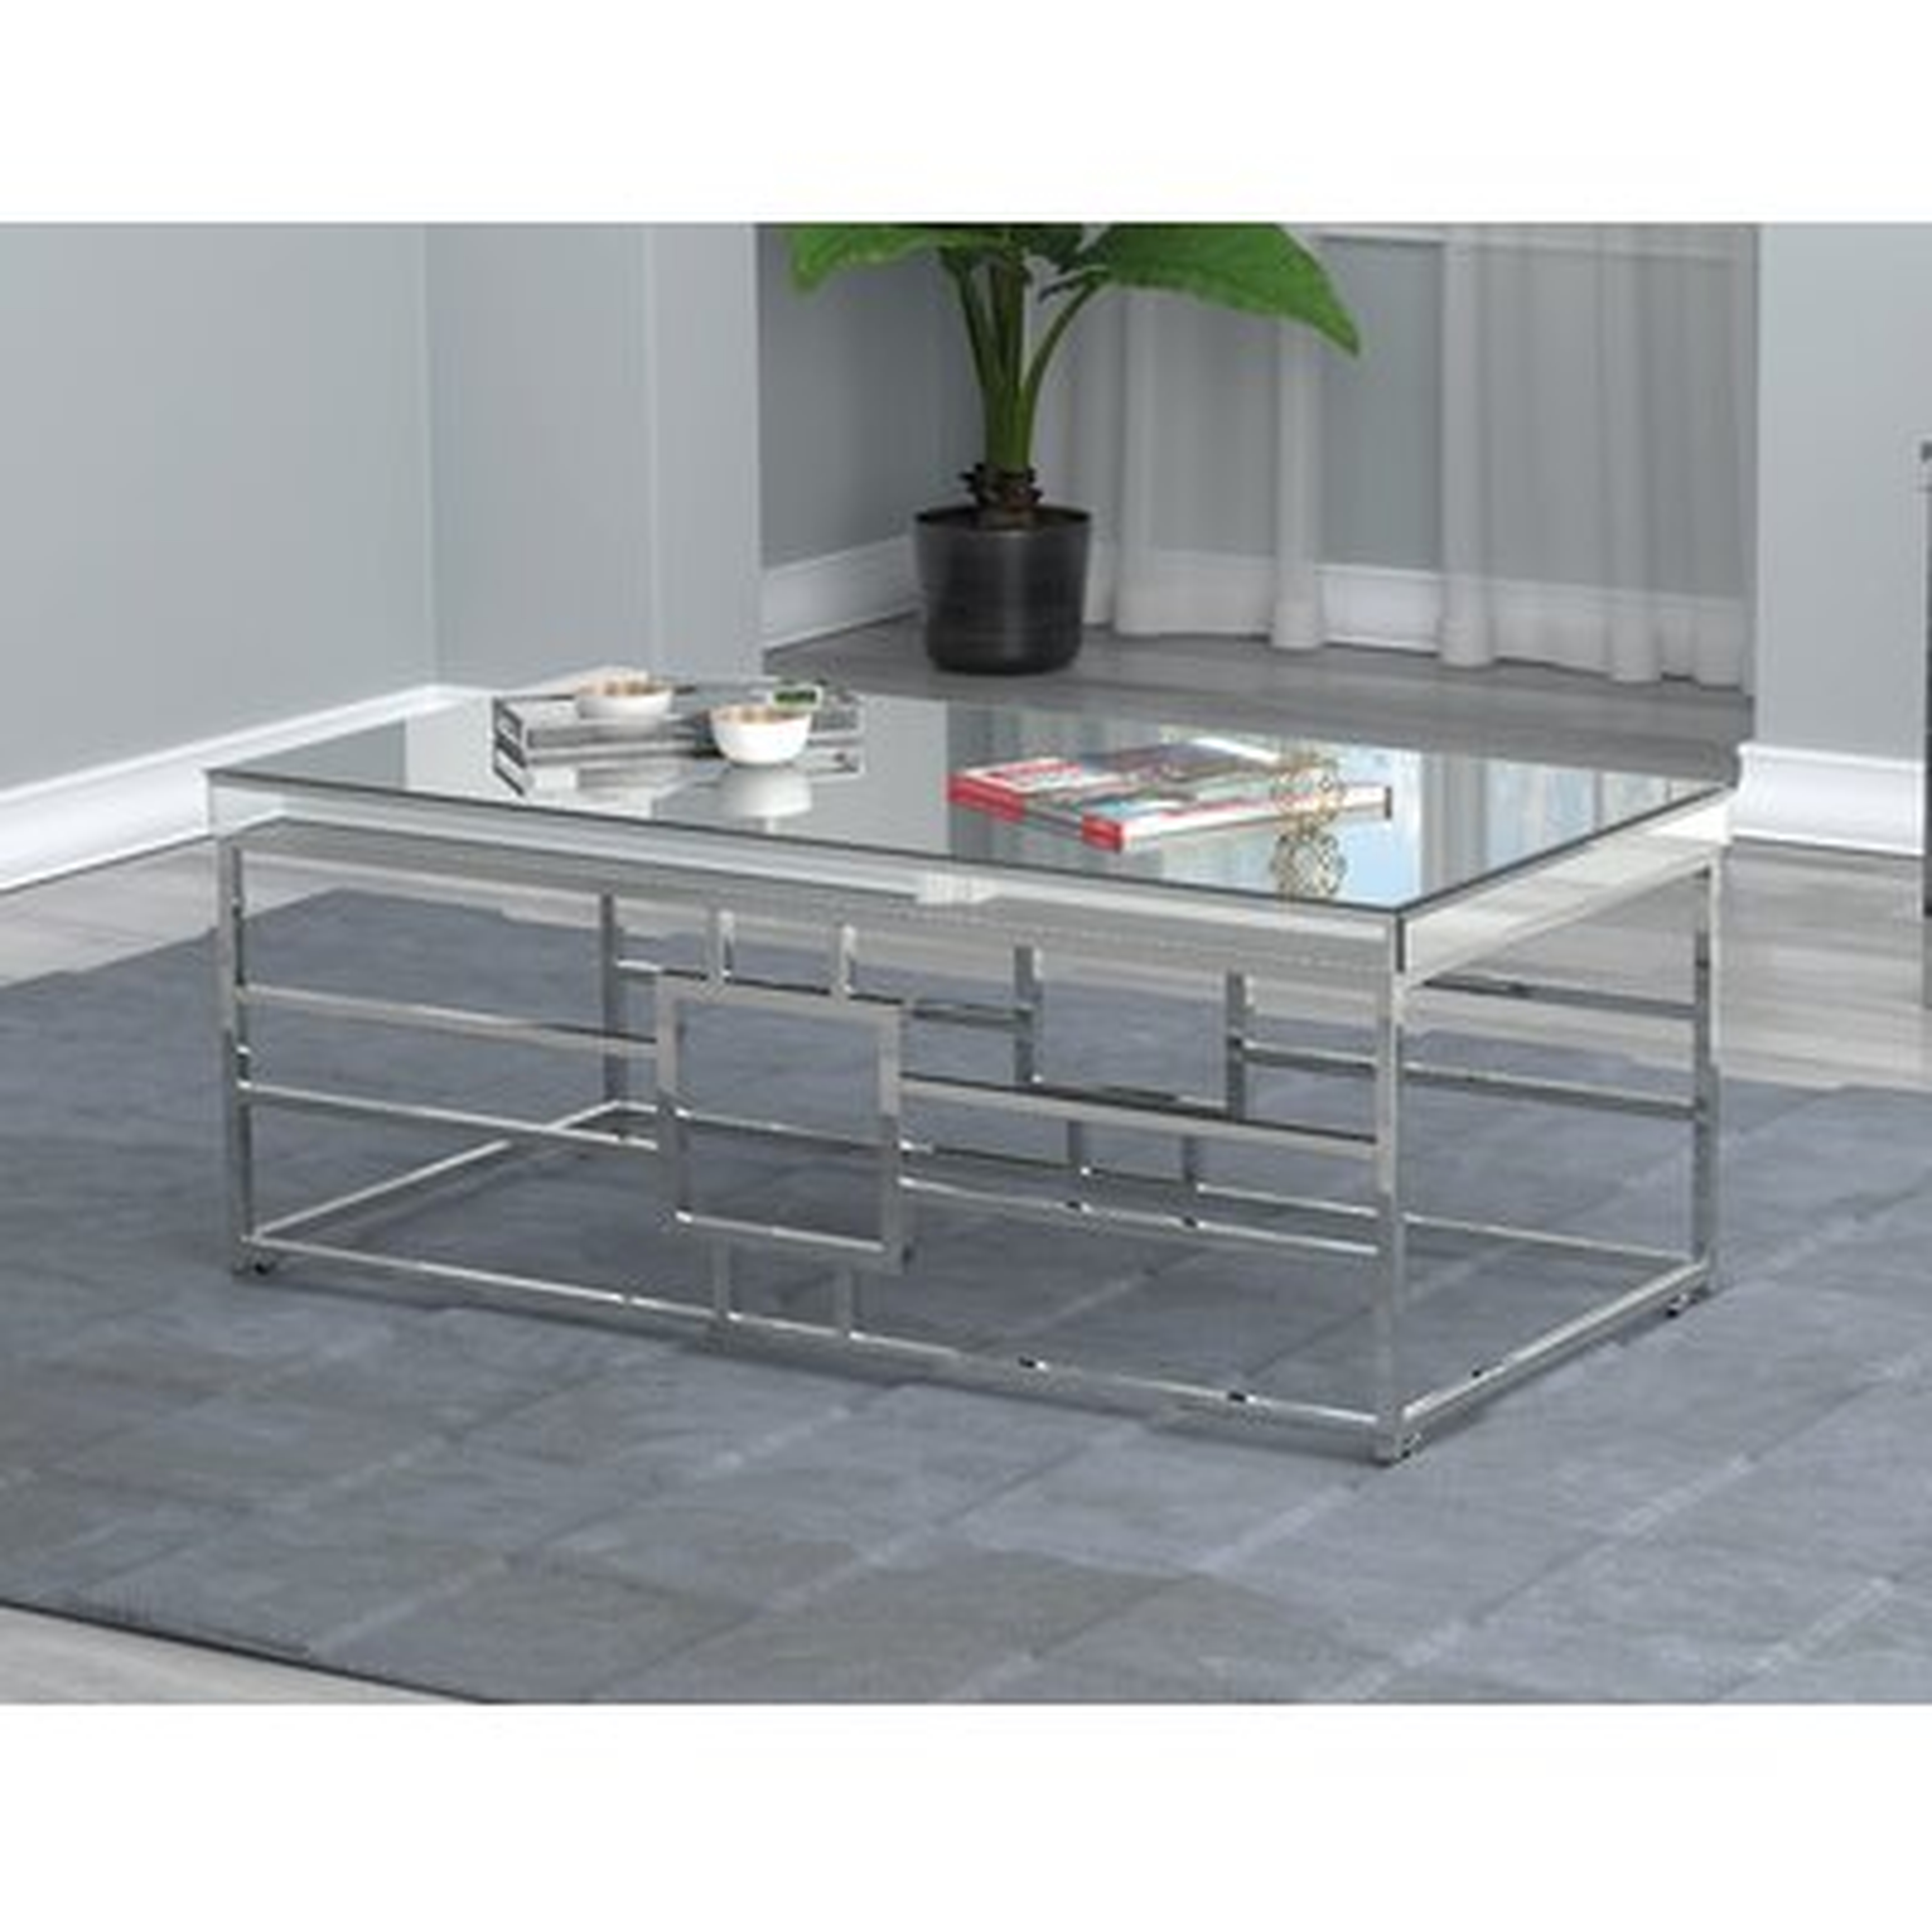 Rectangular Coffee Table With Casters Mirror And Chrome - Wayfair